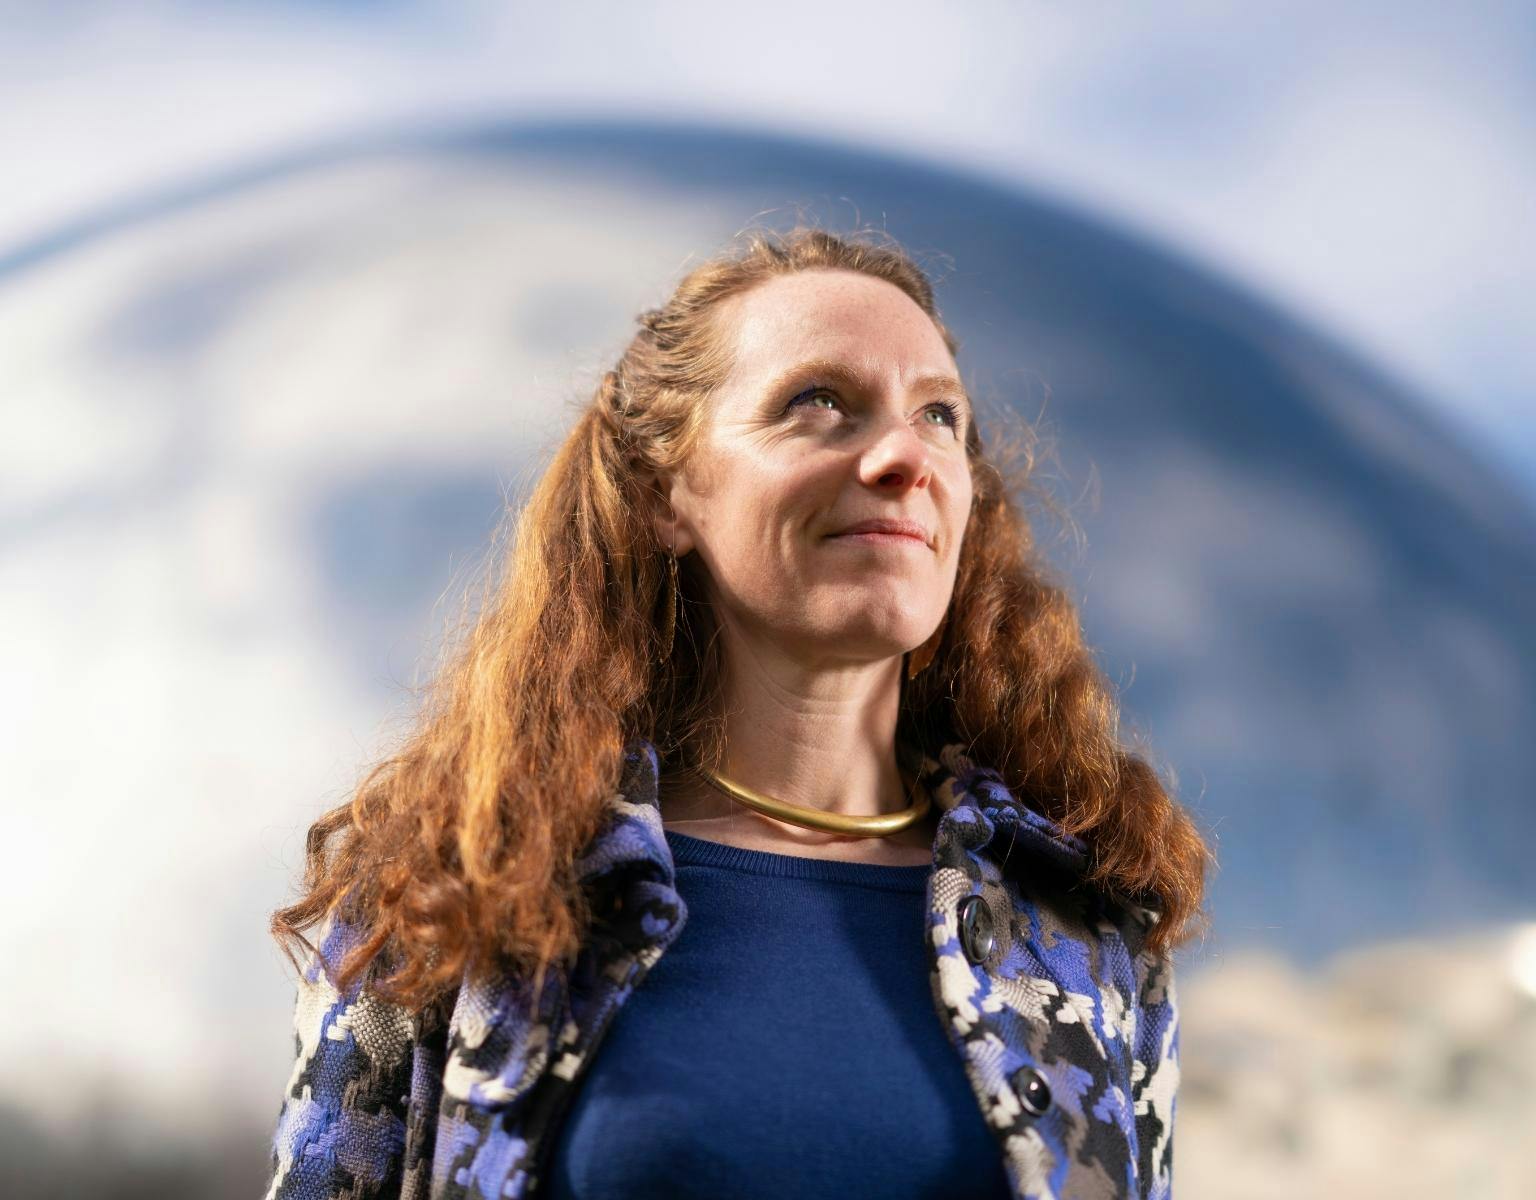 Cassandra Steer, a woman with long red curly hair, looks up and away from the camera while standing in front of a large dome-shaped building.